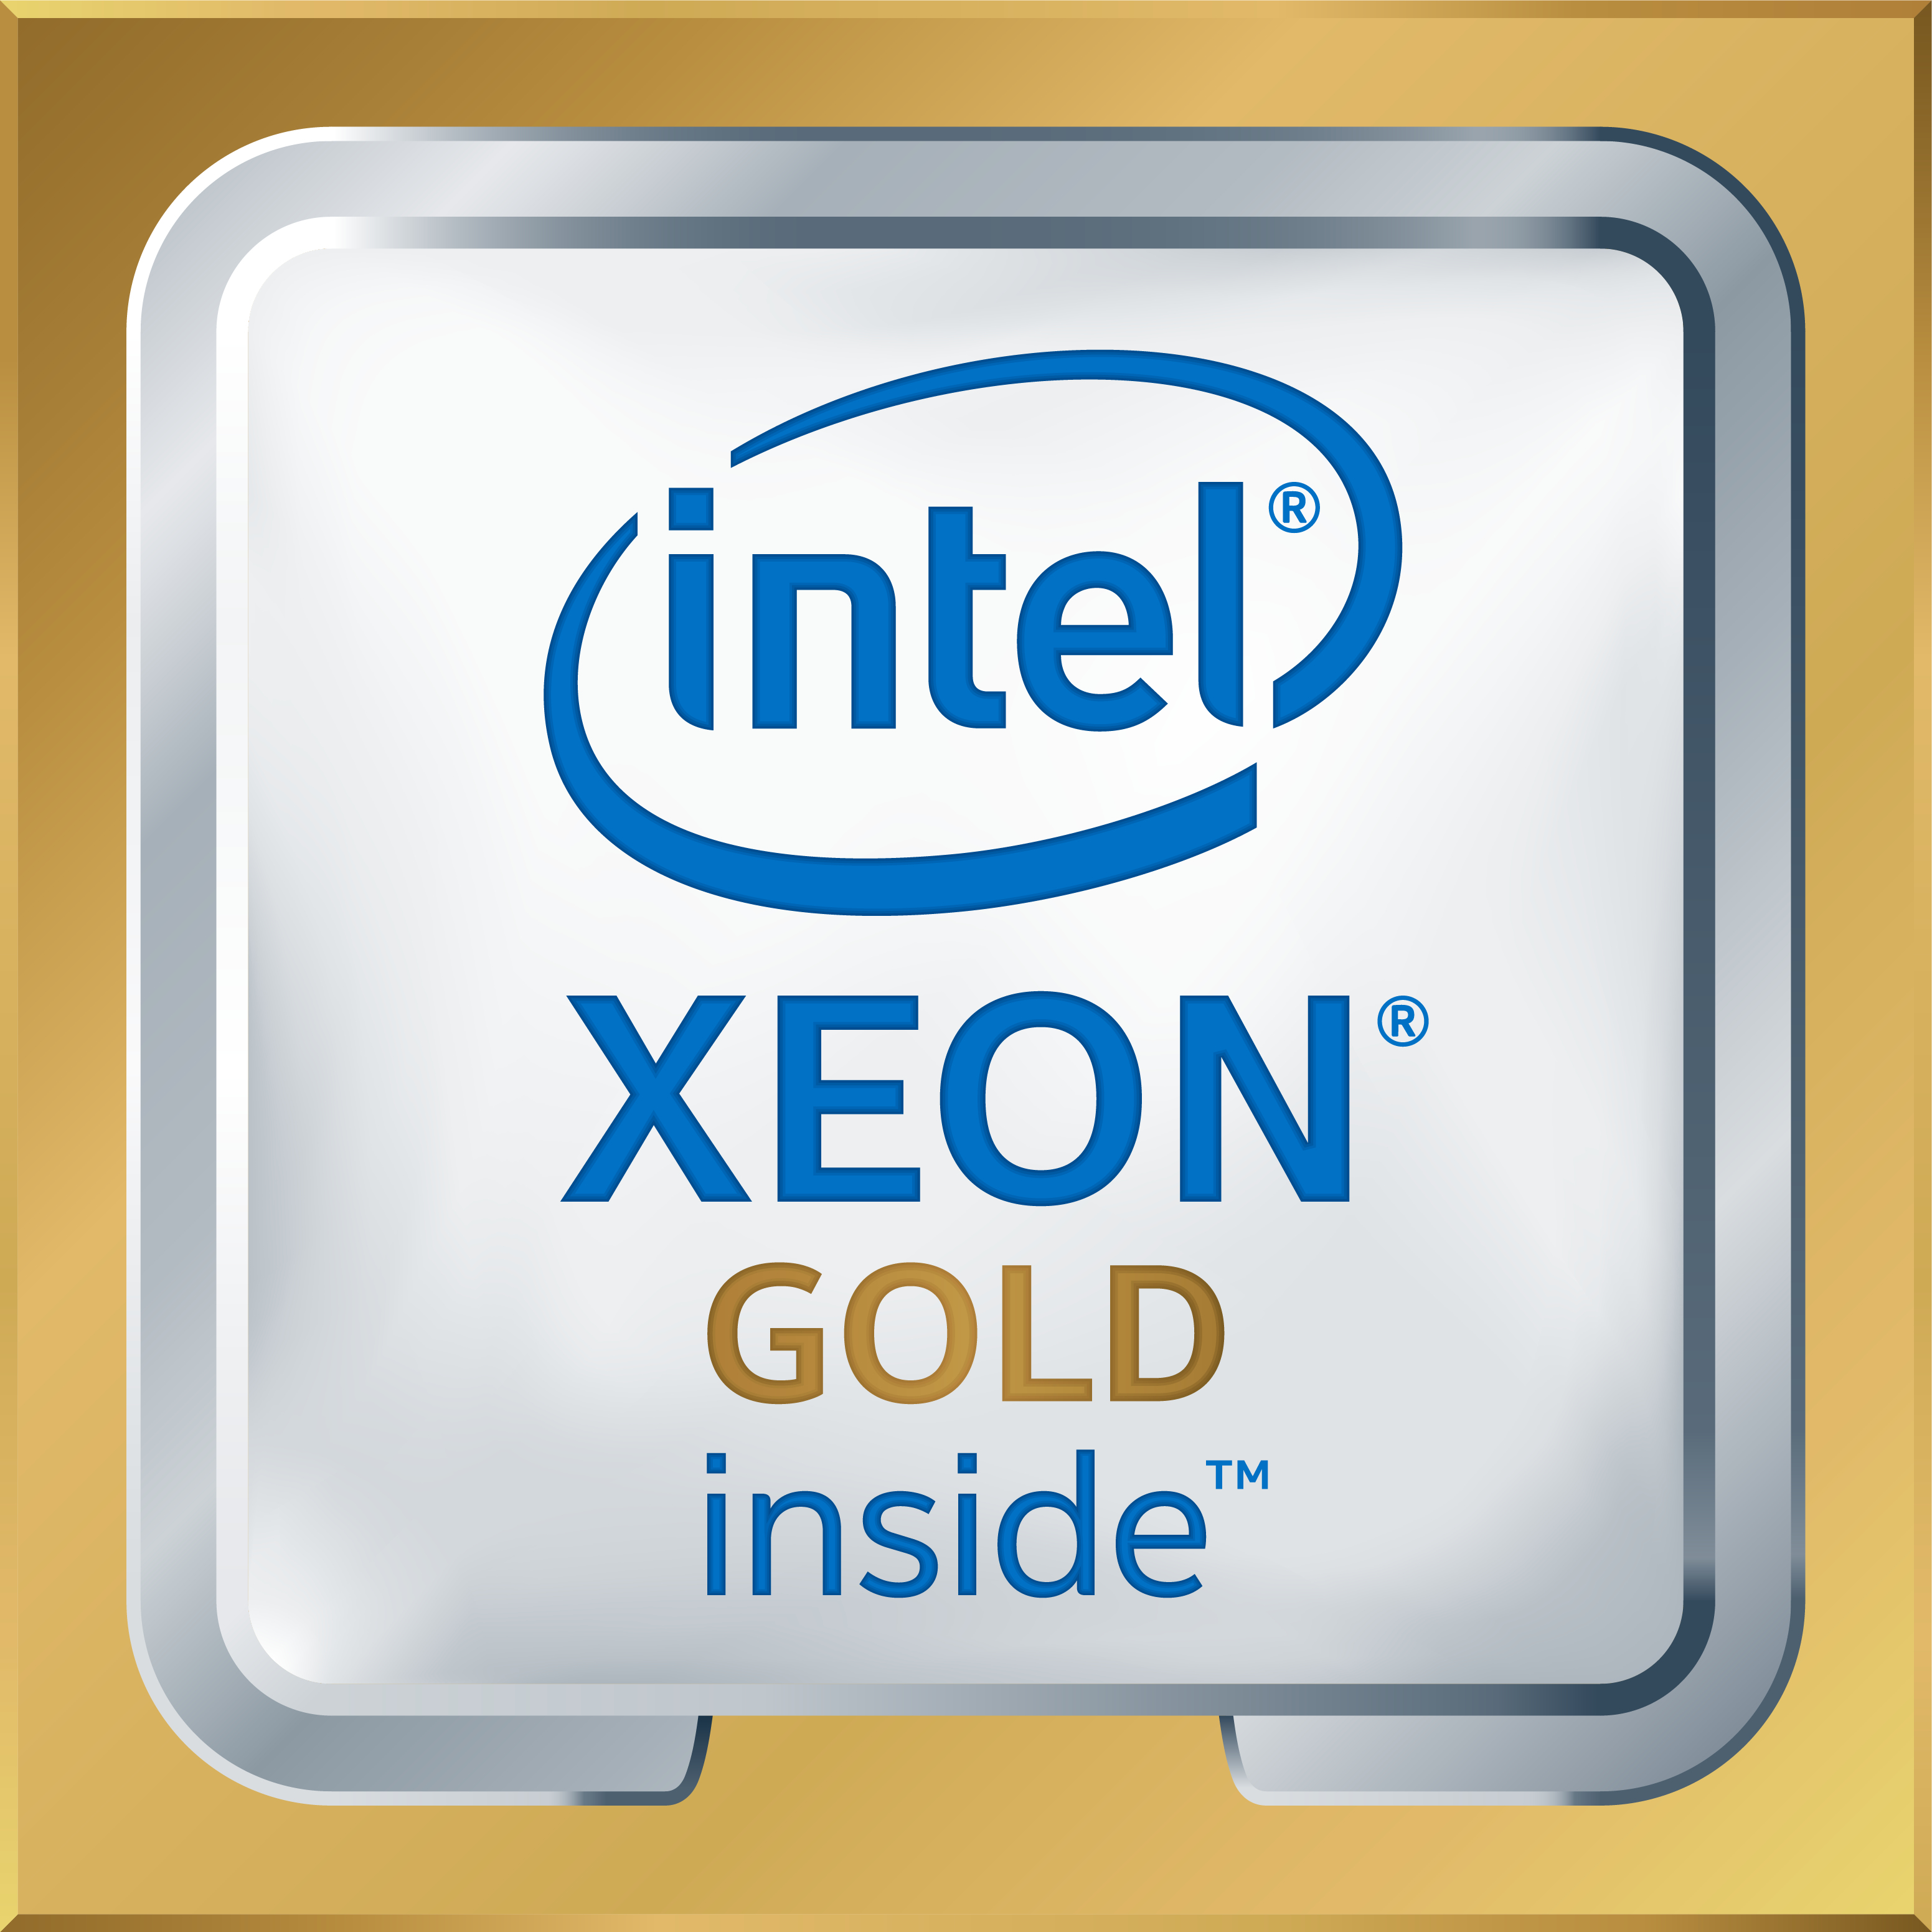 2 x Intel Xeon Gold 6126 - 2.6 GHz - 12-core - 19.25 MB cache - for ThinkSystem SN850